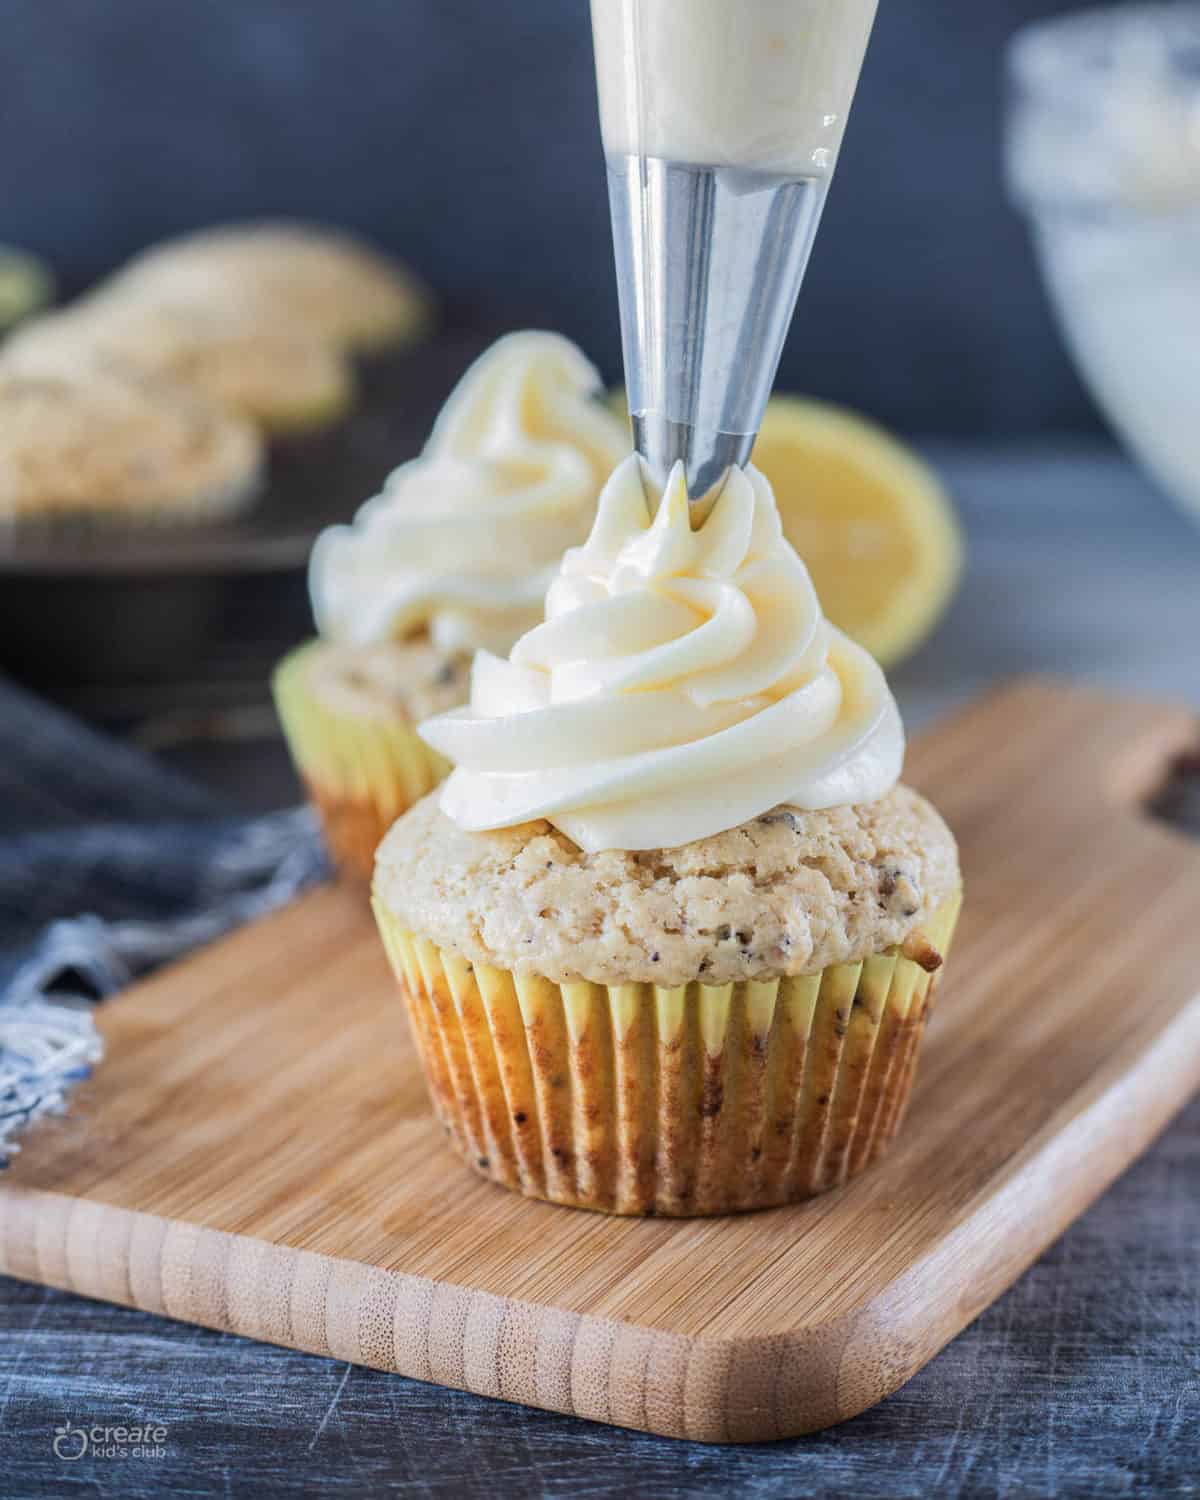 Lemon Cream Cheese Frosting by Create Kid's Club // FoodNouveau.com